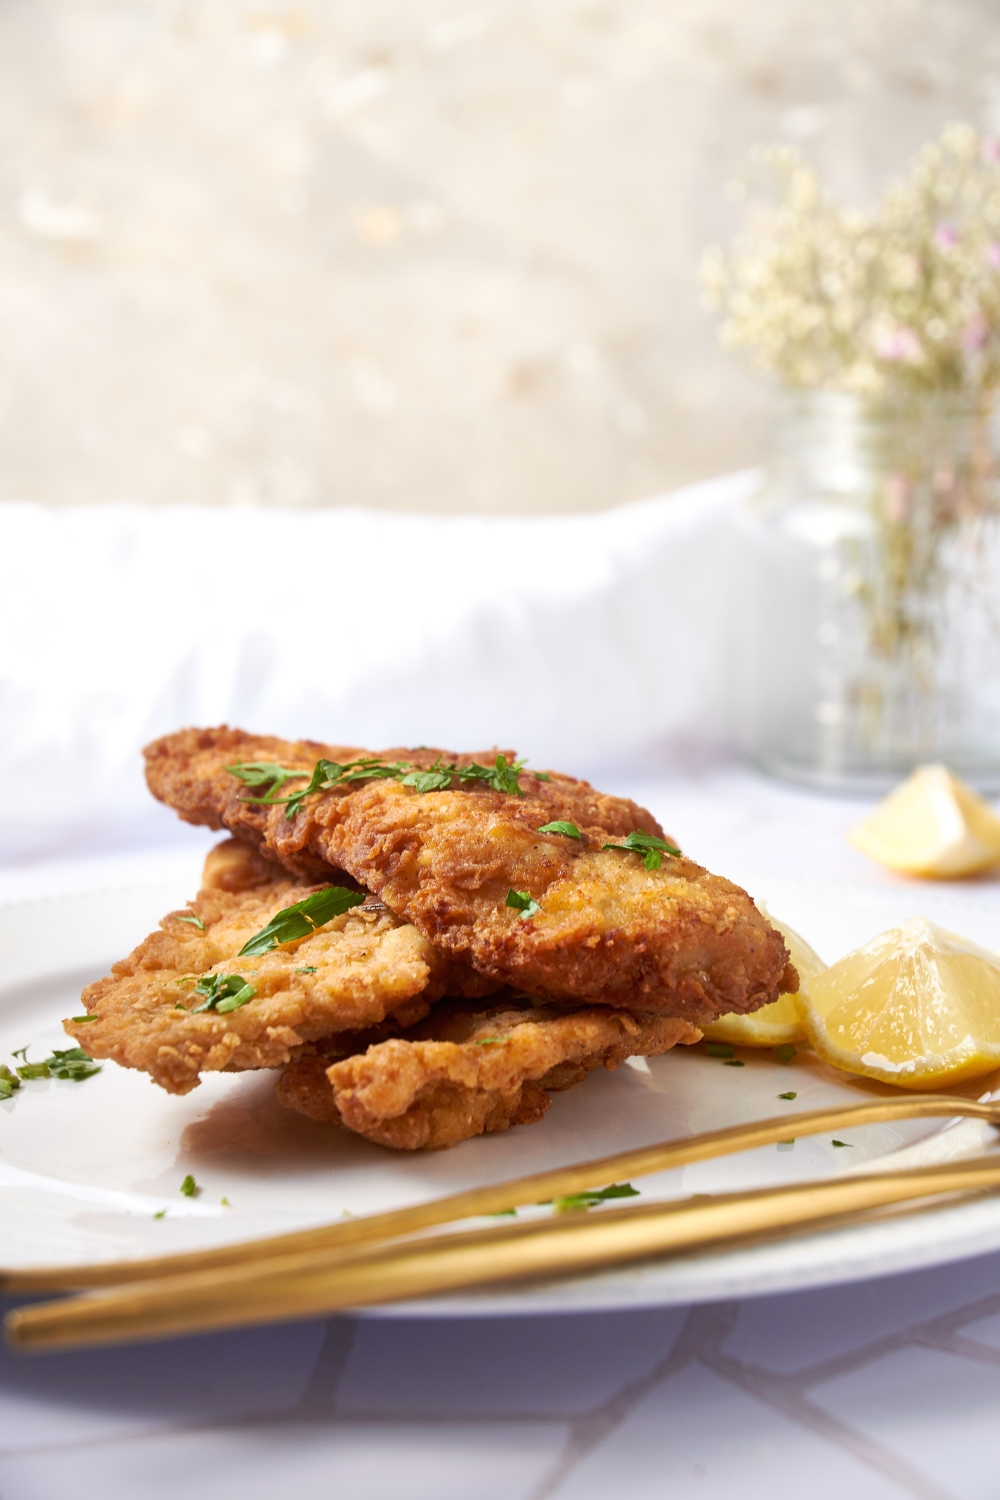 Three pieces of fried chicken stacked on top of each other, garnished with fresh herbs and two lemon wedges.